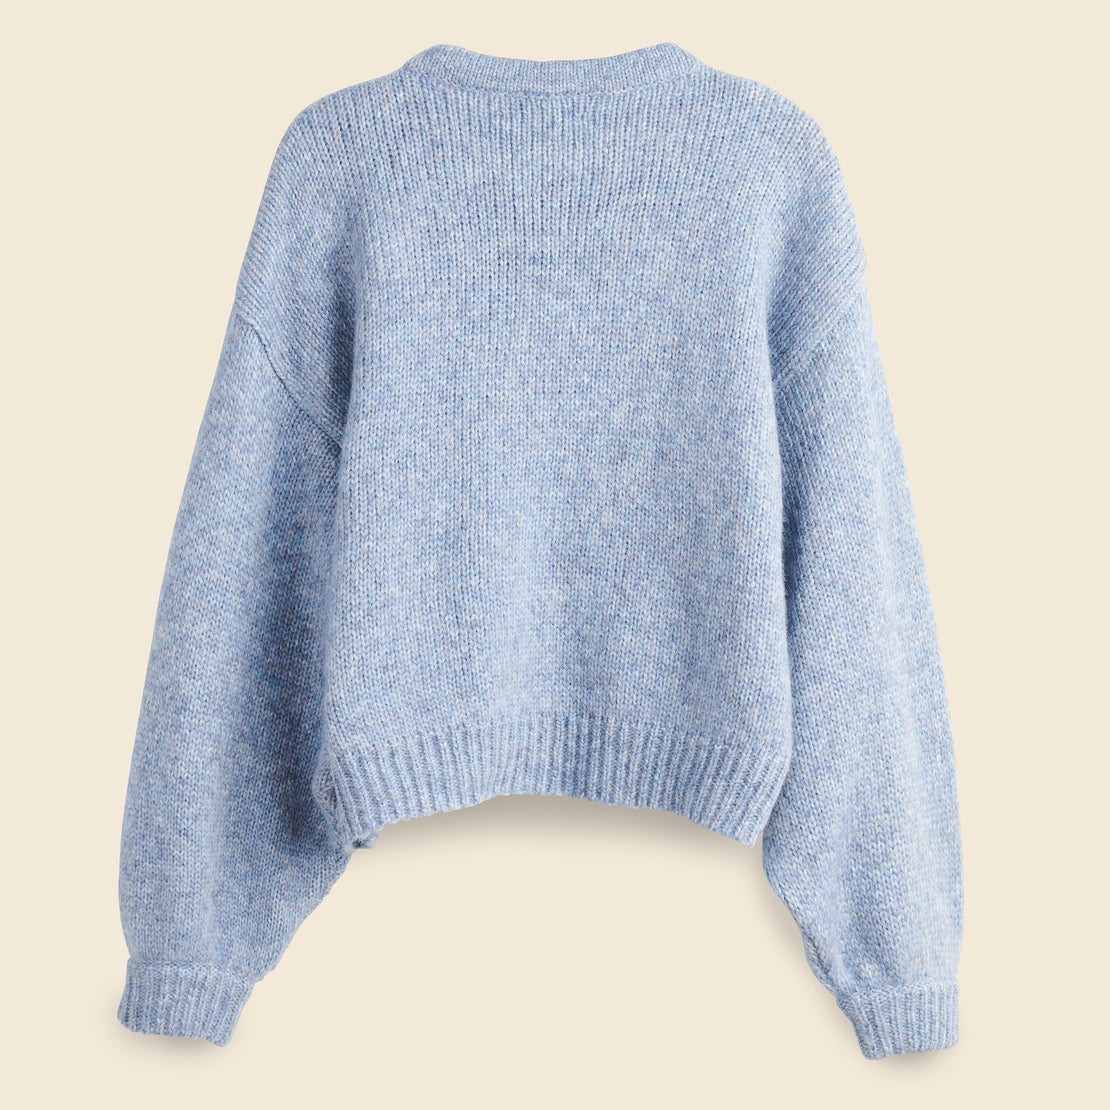 Balloon Sleeve Sweater - Spring Sky - Atelier Delphine - STAG Provisions - W - Tops - Sweater